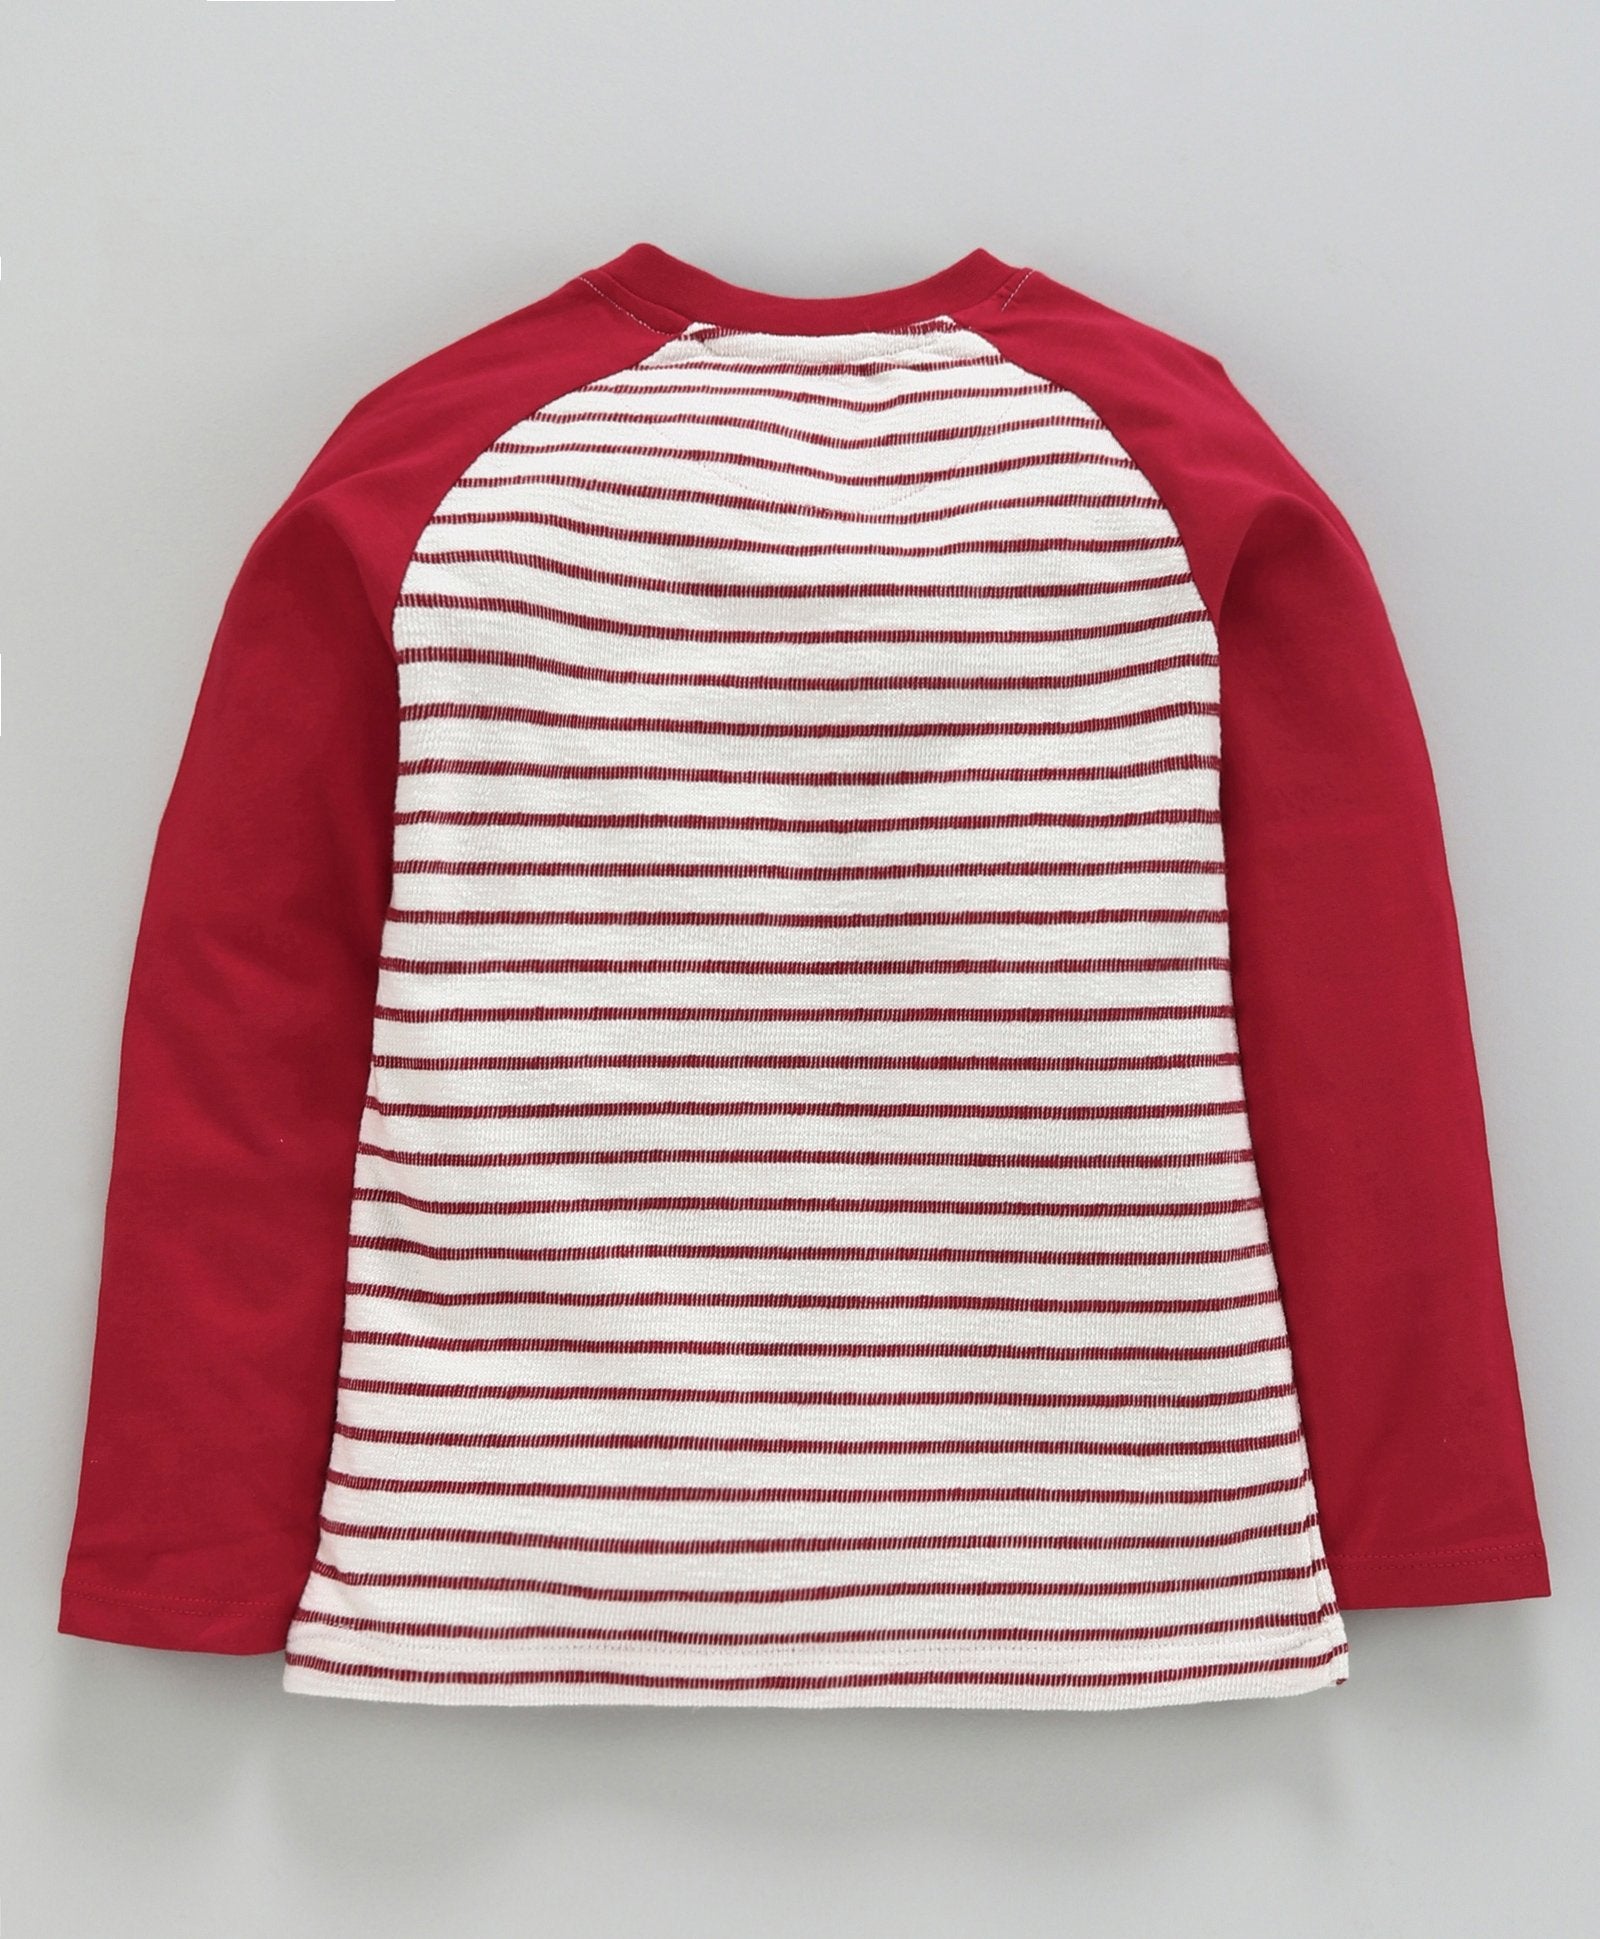 Striped Full Sleeves Tee - White & Red